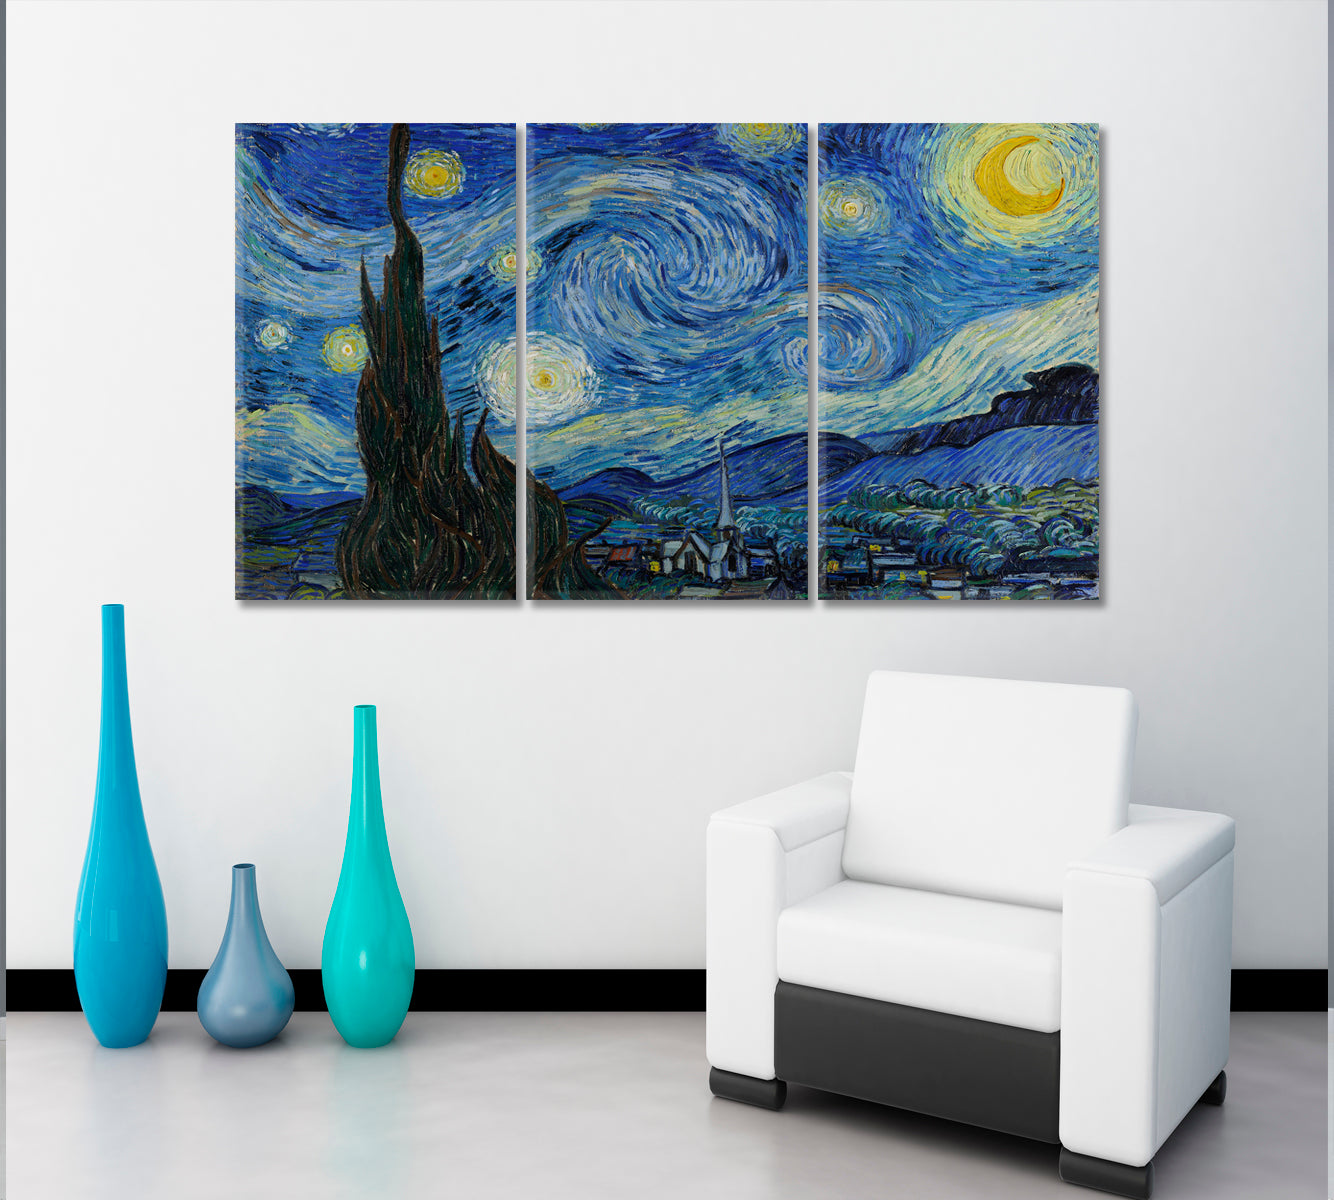 The Starry Night Vincent van Gogh Masterpieces Reproduction Contemporary Art Artesty 3 panels 36" x 24" 